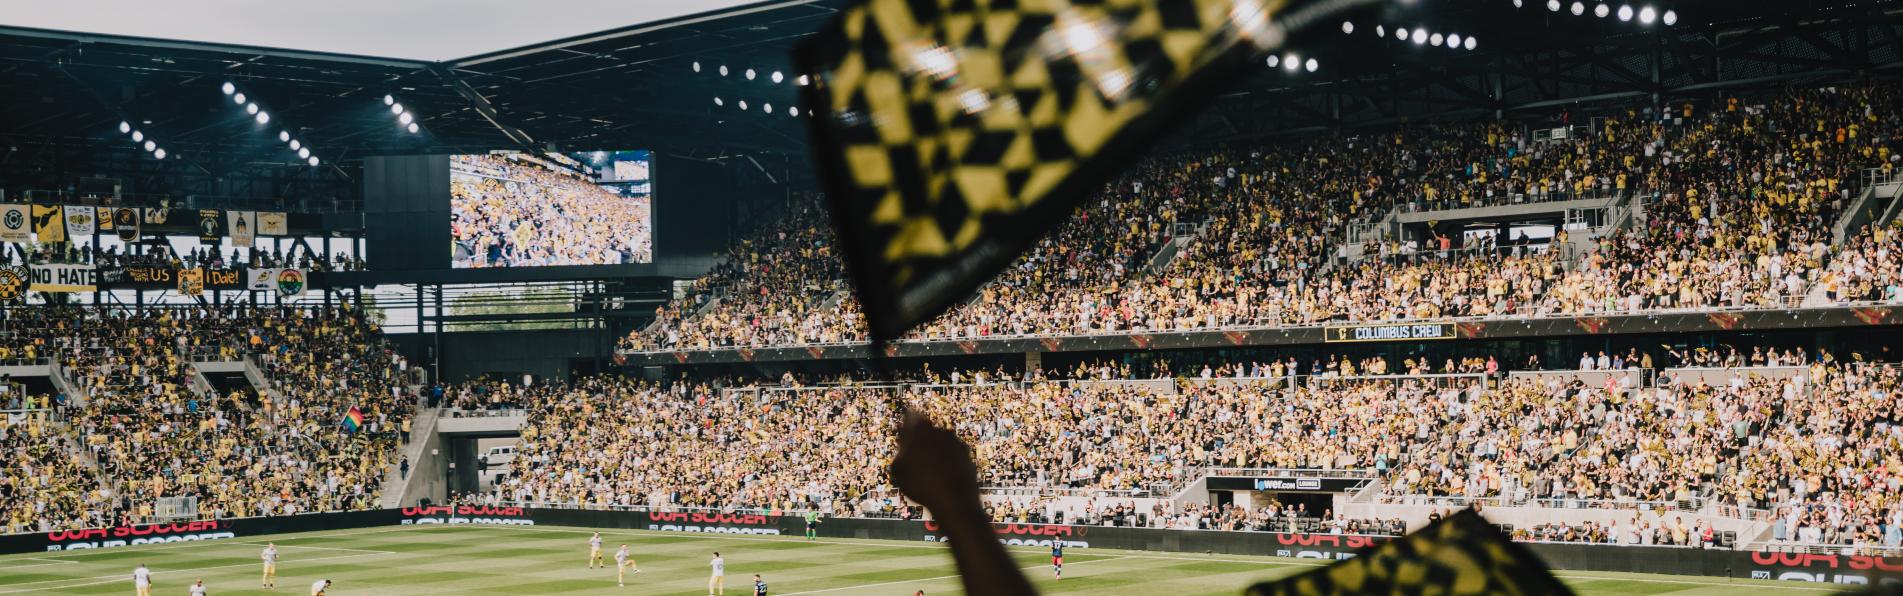 Are Columbus Crew among the MLS is Back favourites?